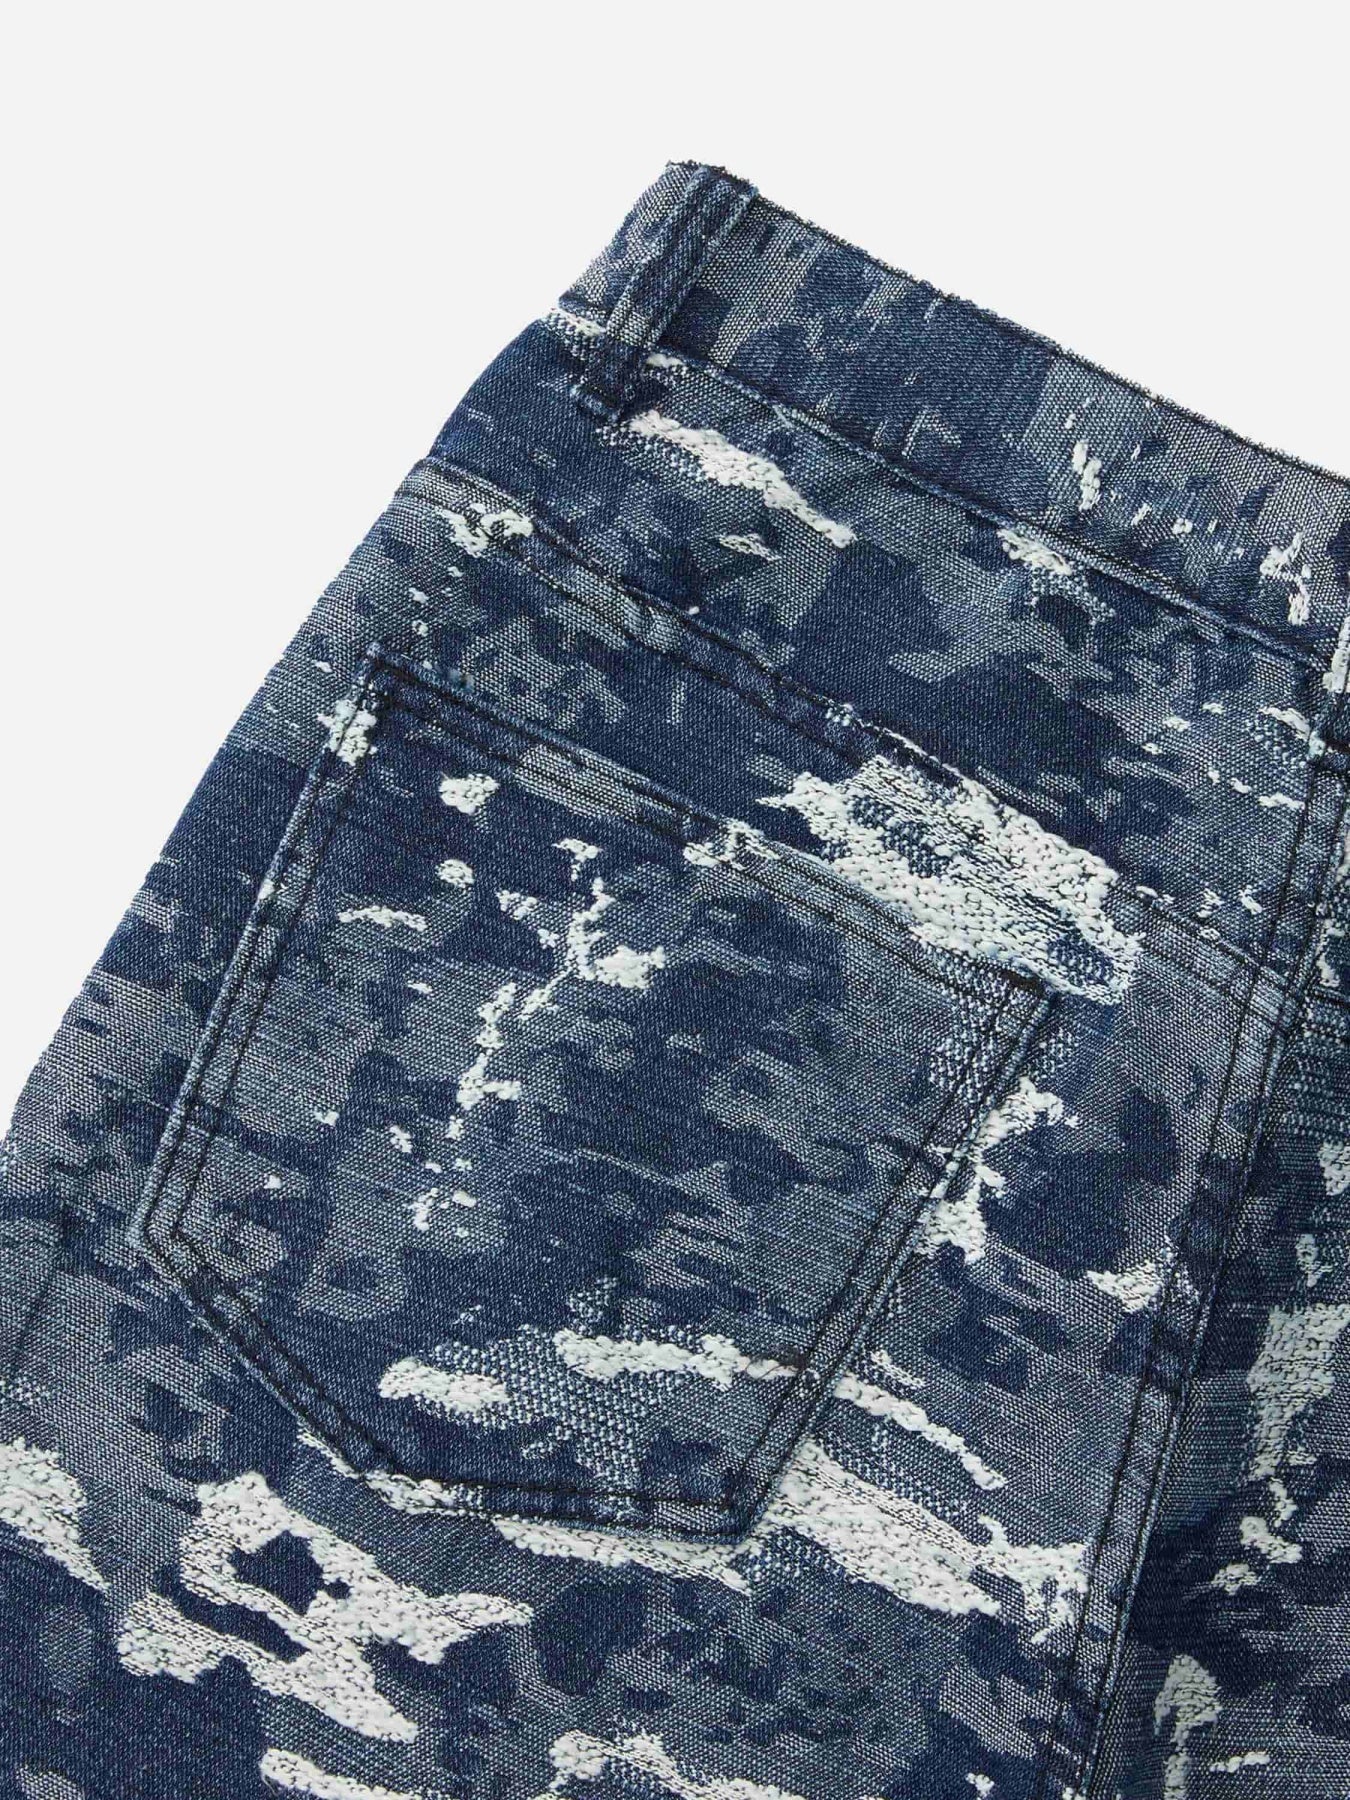 Sneakerland Camouflage Jeans SP230525PWLI